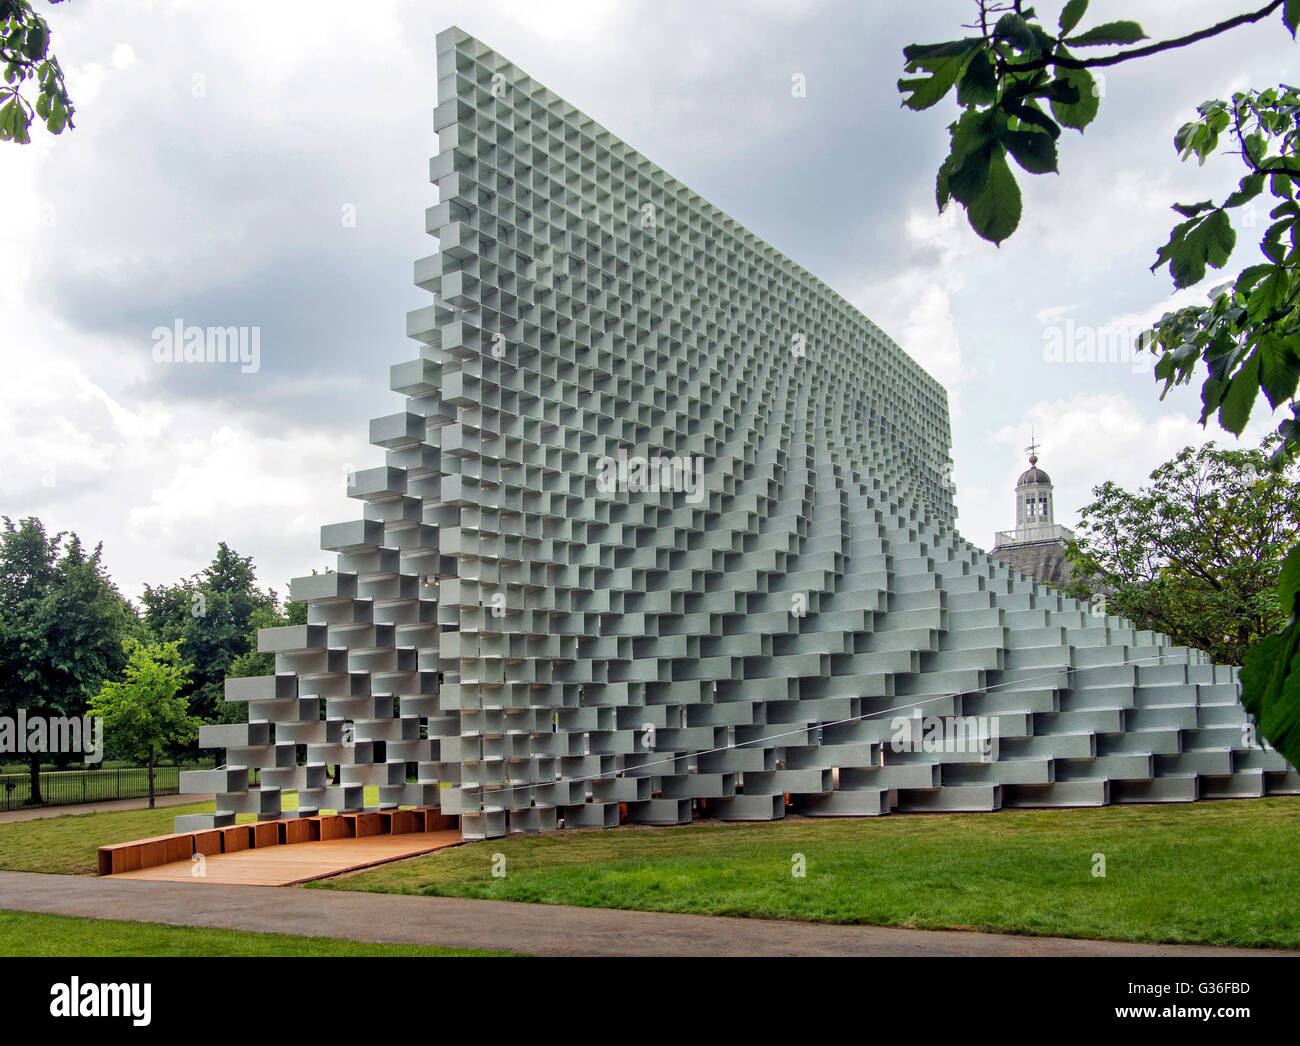 The 2016 Serpentine Gallery Pavilion designed by Bjarke Inges. Stock Photo